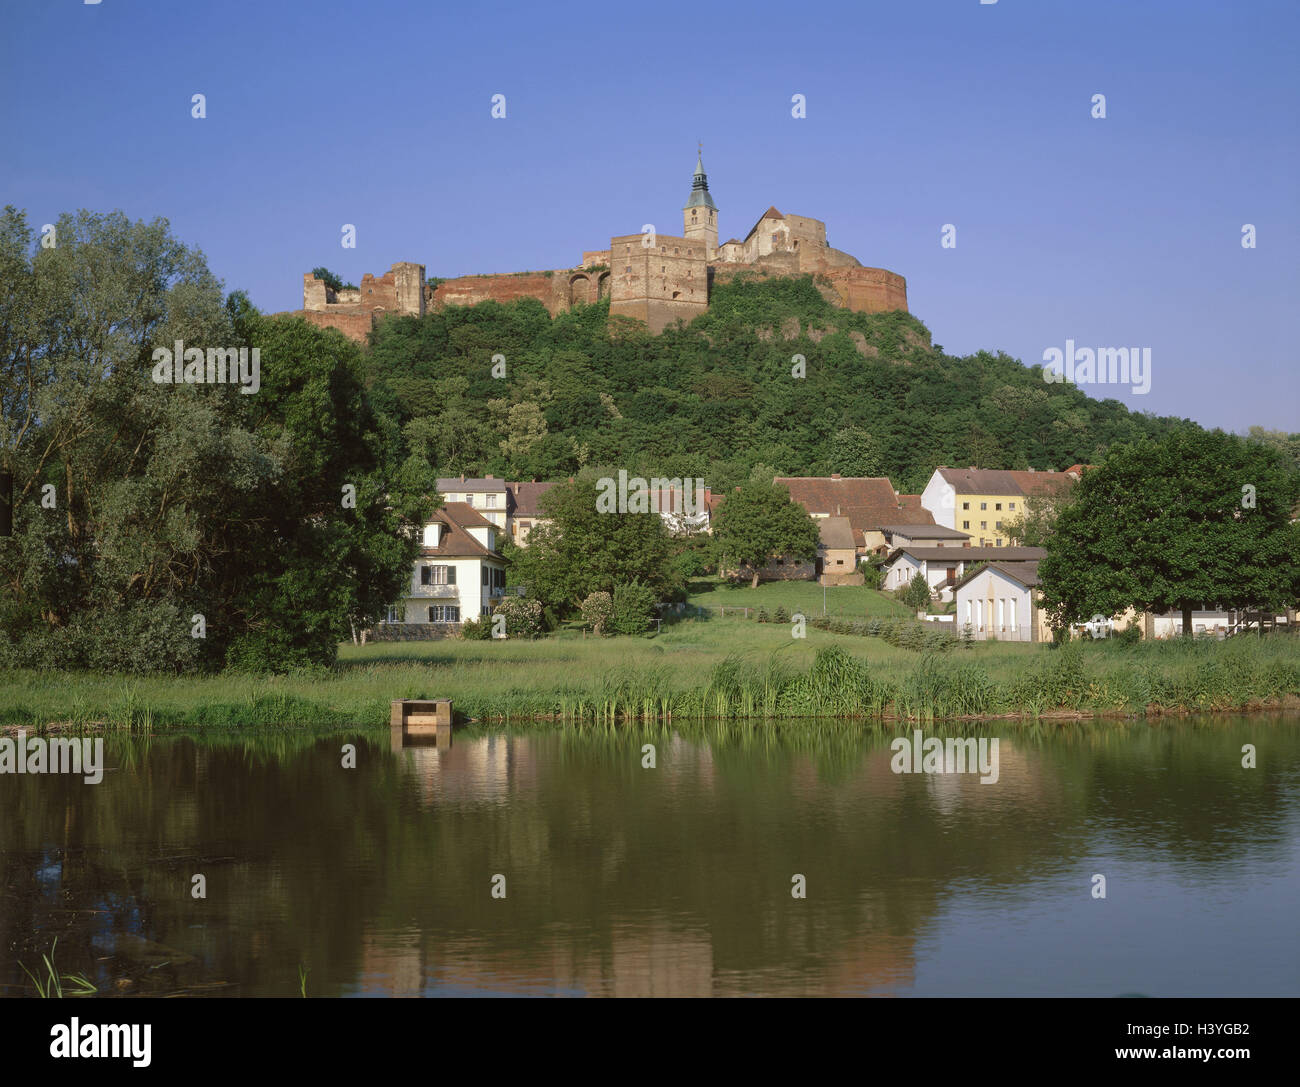 Austria, Burgenland, Güssing, local view, Europe, place, houses, residential houses, hills, castle defensive walls, castle, cloister, Franciscan's cloister, structure, architecture, place of interest, lake, waters Stock Photo